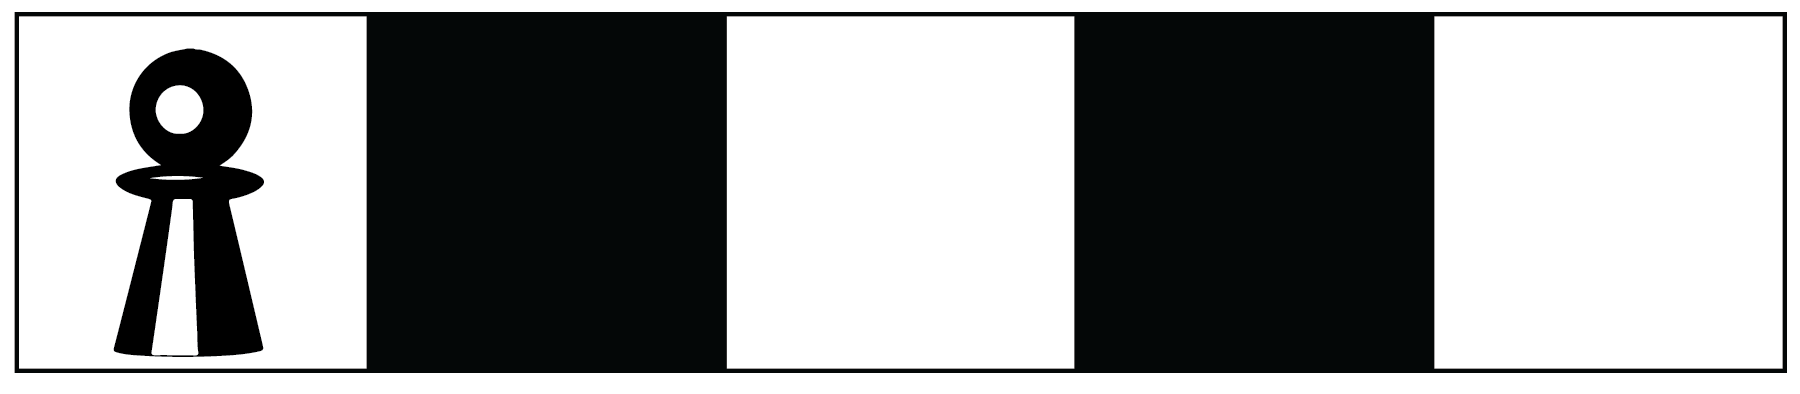 A game board with one row of alternating white and black squares. There are five squares in total and the board begins and ends with a white square. A playing piece is located on the first white square.